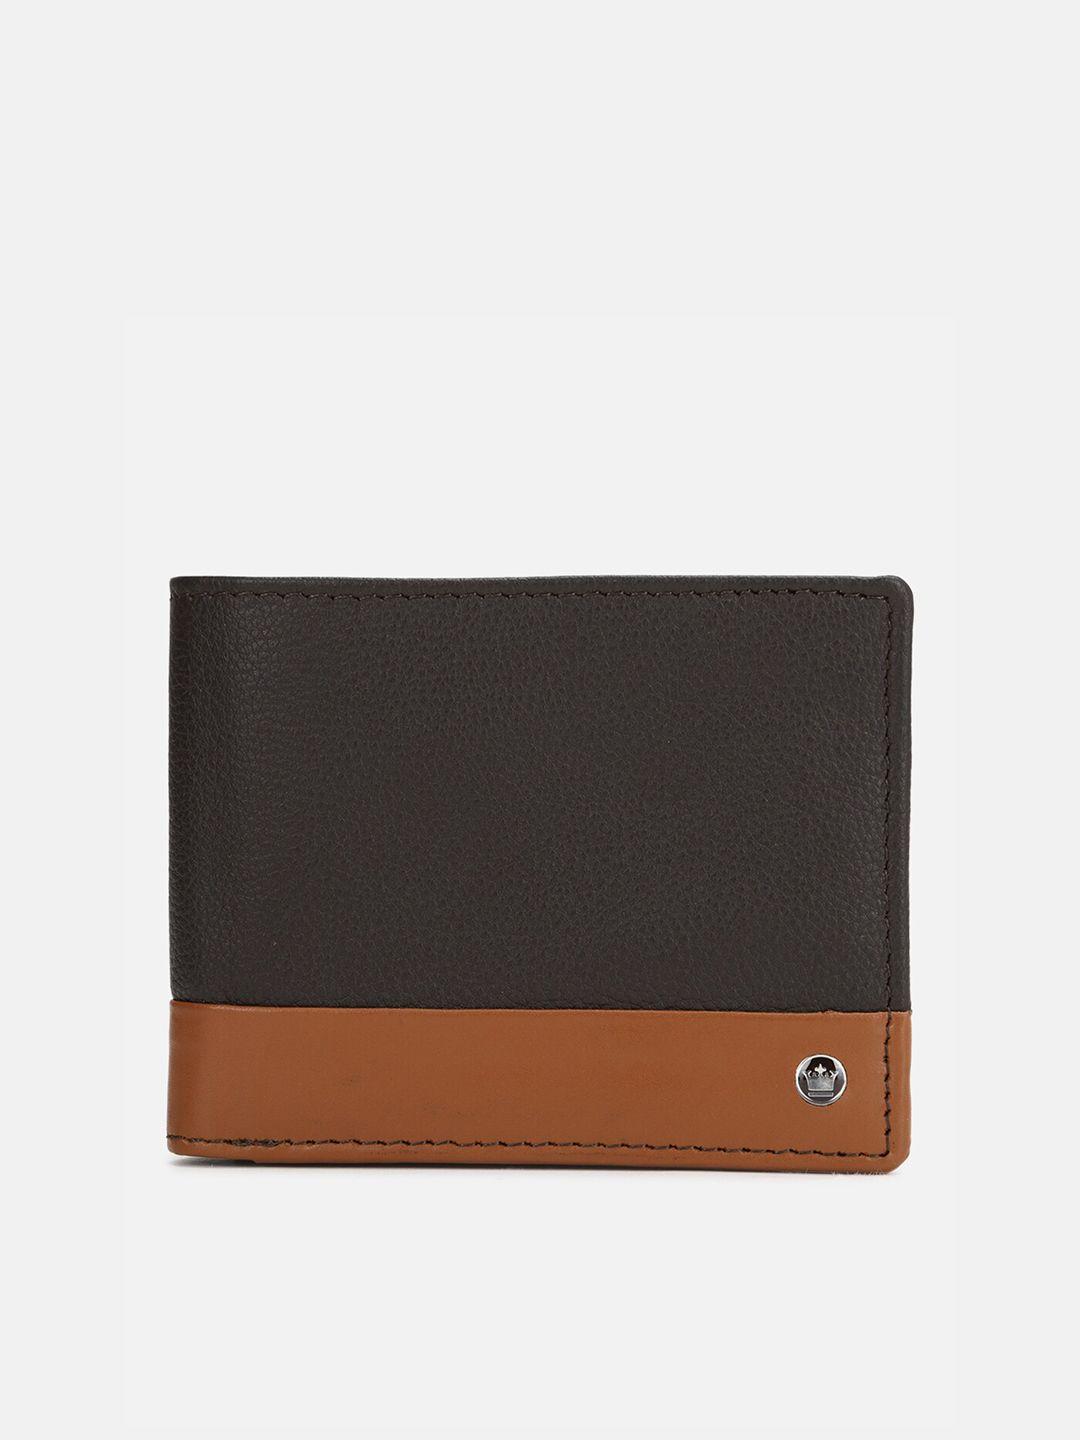 louis philippe men black & brown textured leather two fold wallet